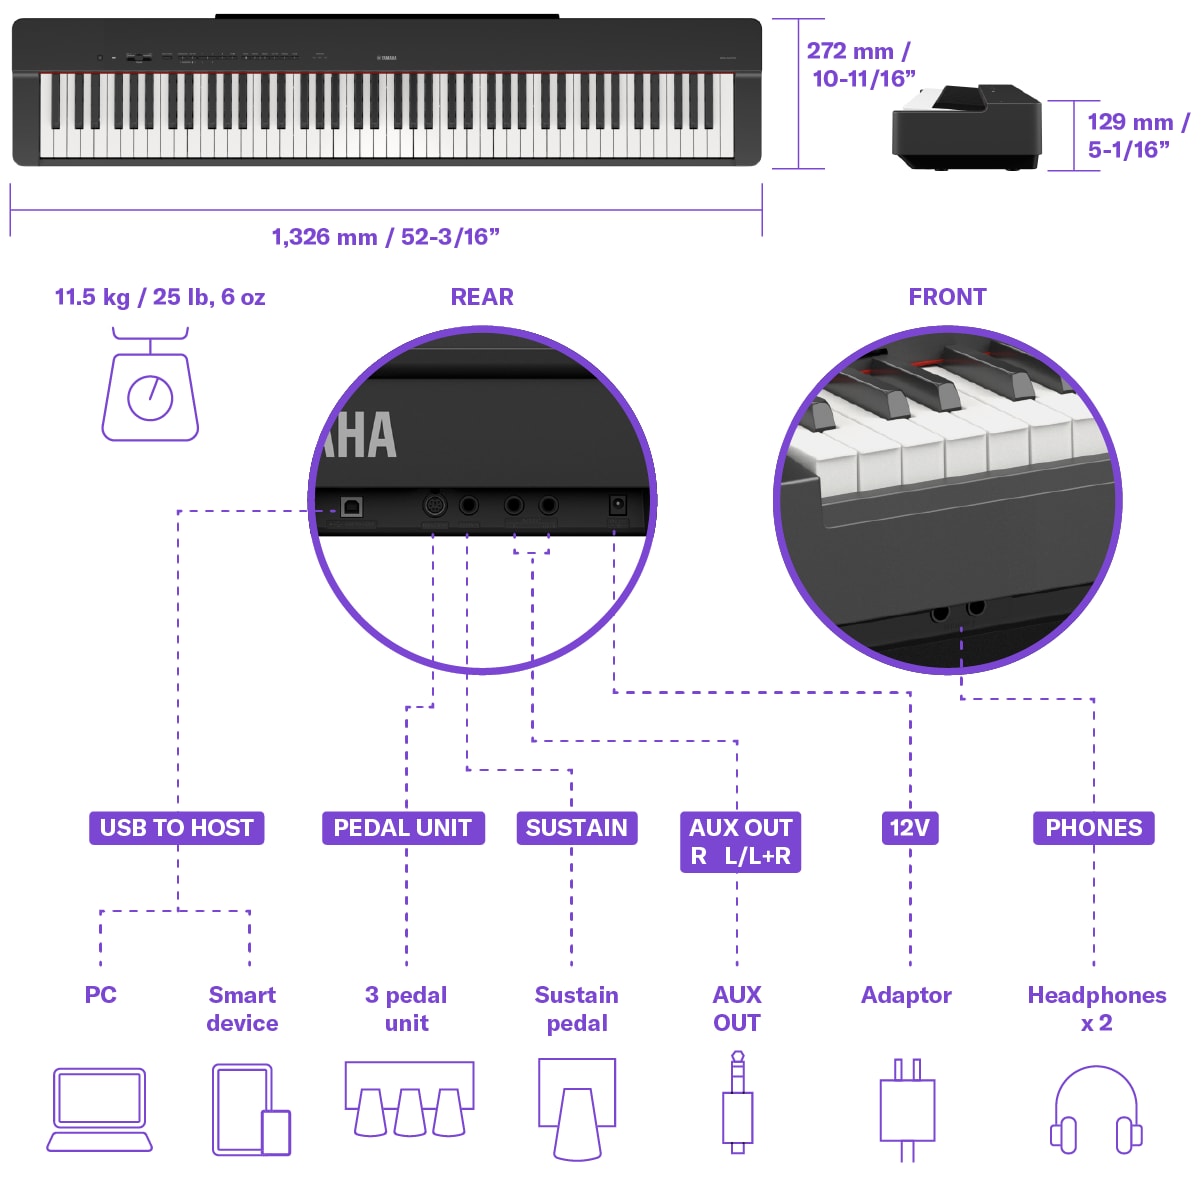 P-225 - Overview - P Series - Pianos - Musical Instruments